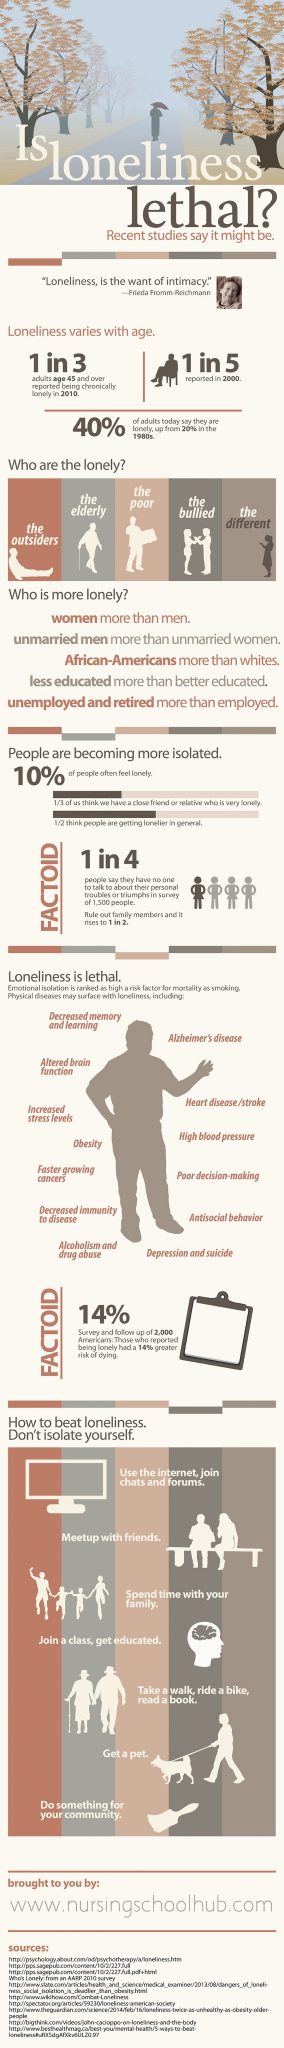 Is Loneliness Lethal